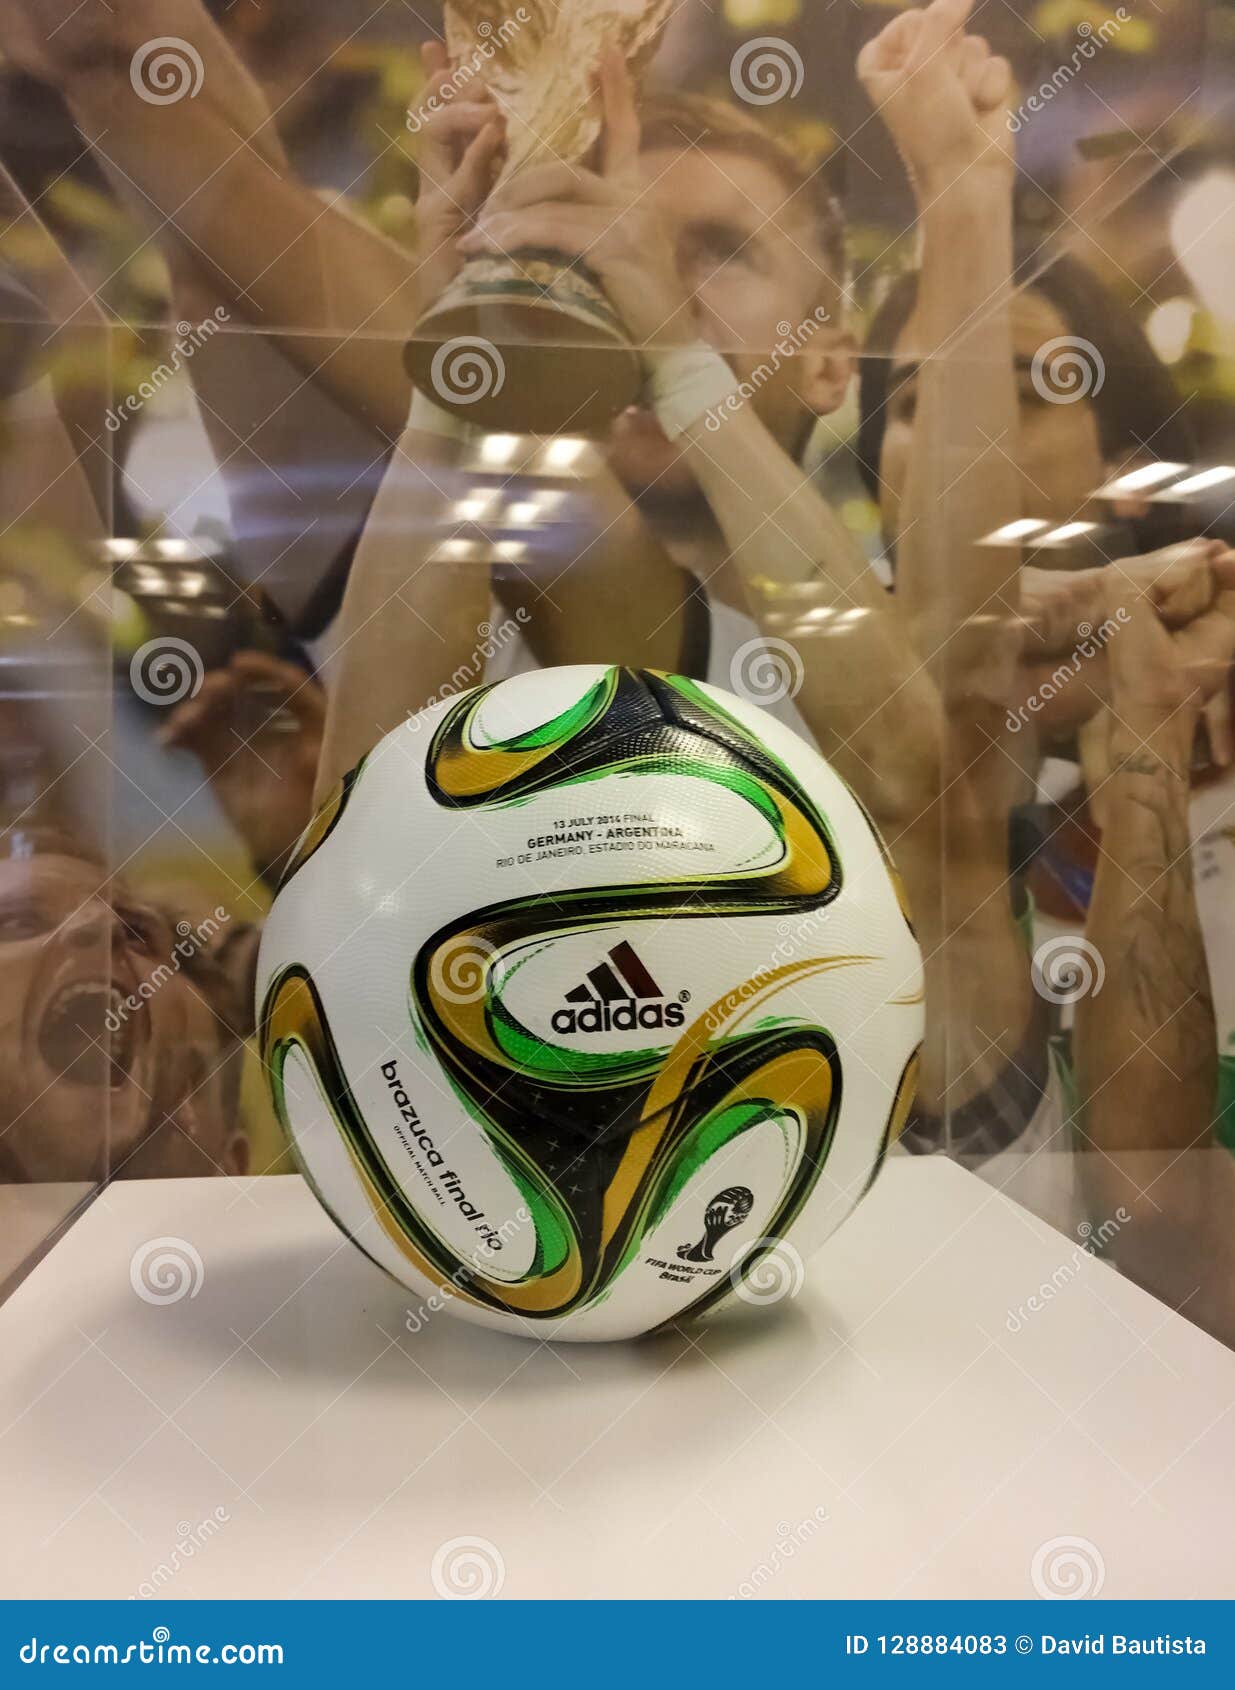 FREE SHIPPING │RS BRAZUCA FOOTBALL WORLD CUP 2014 BRAZIL SOCCER BALL SIZE 5 